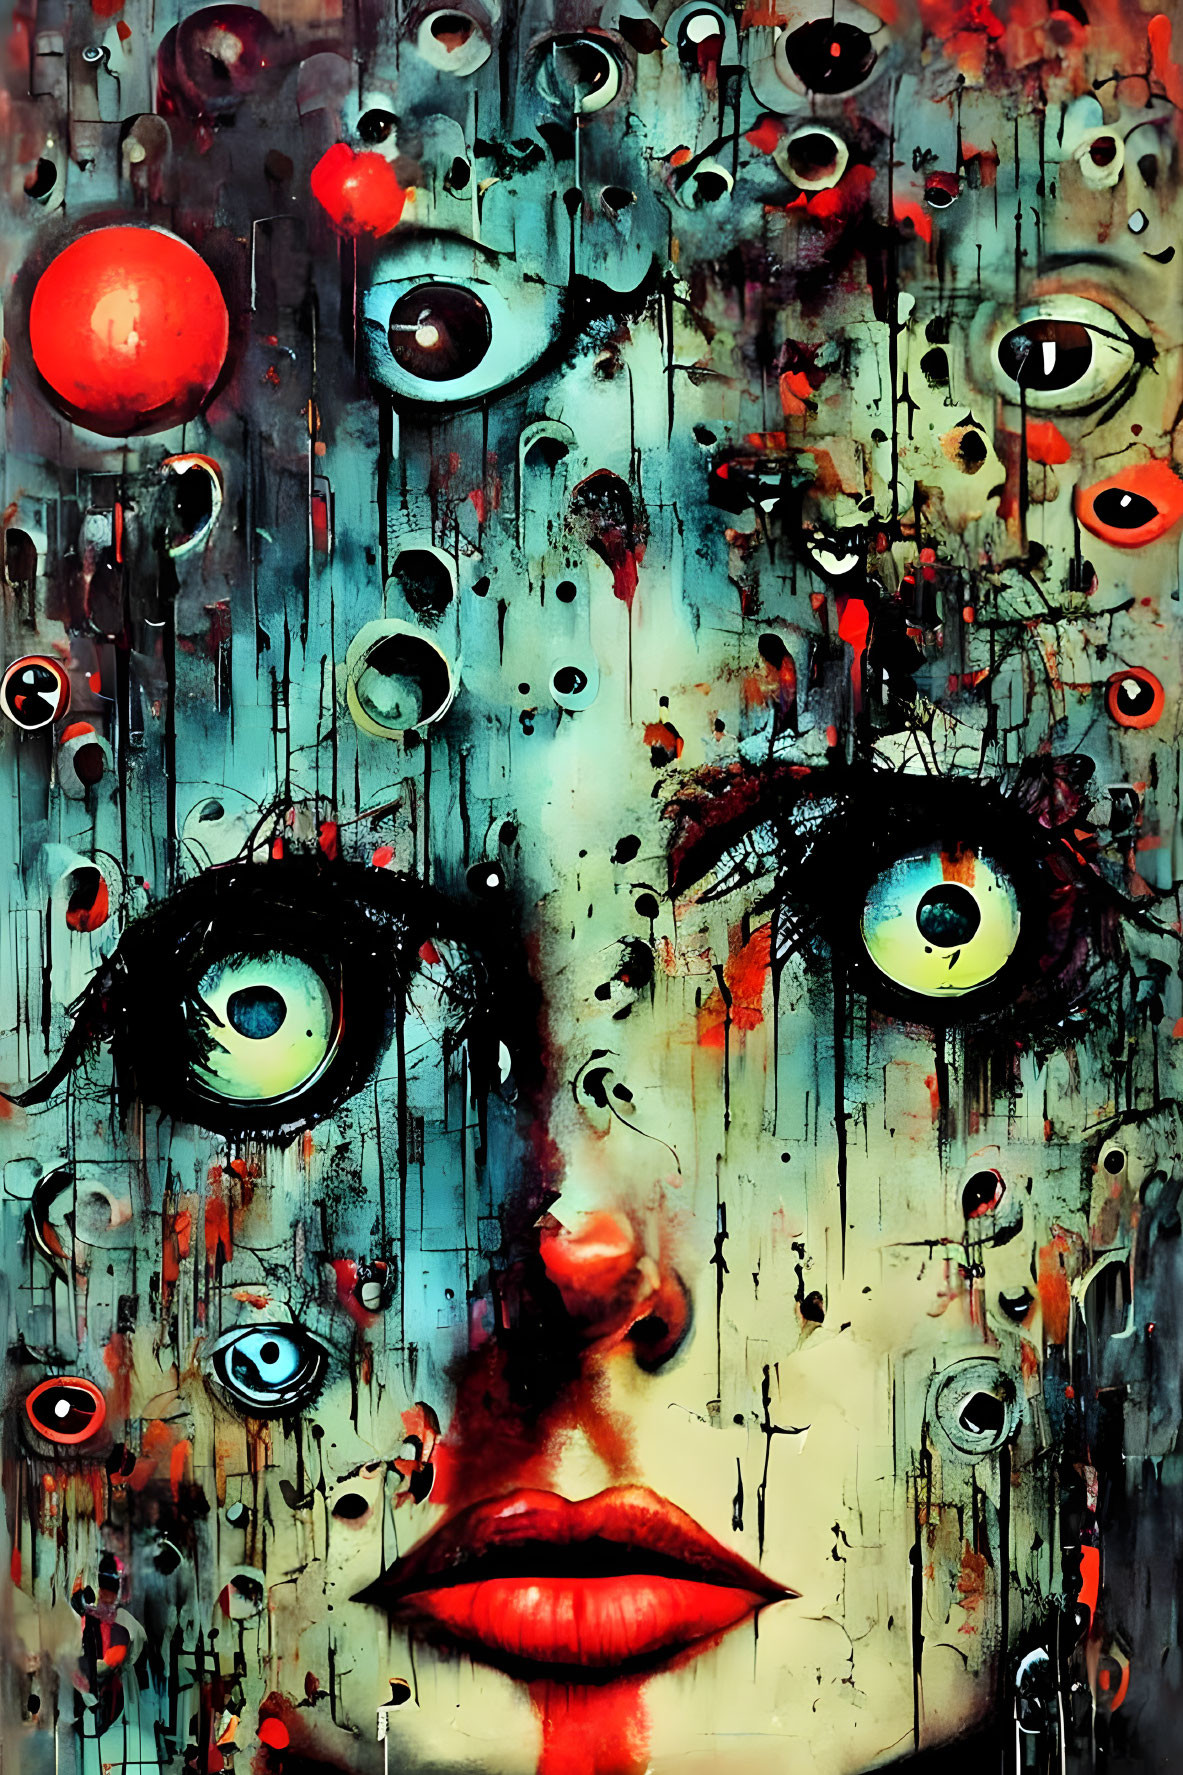 Surreal female face with multiple eyes and colorful paint drips, red accents, and apple.